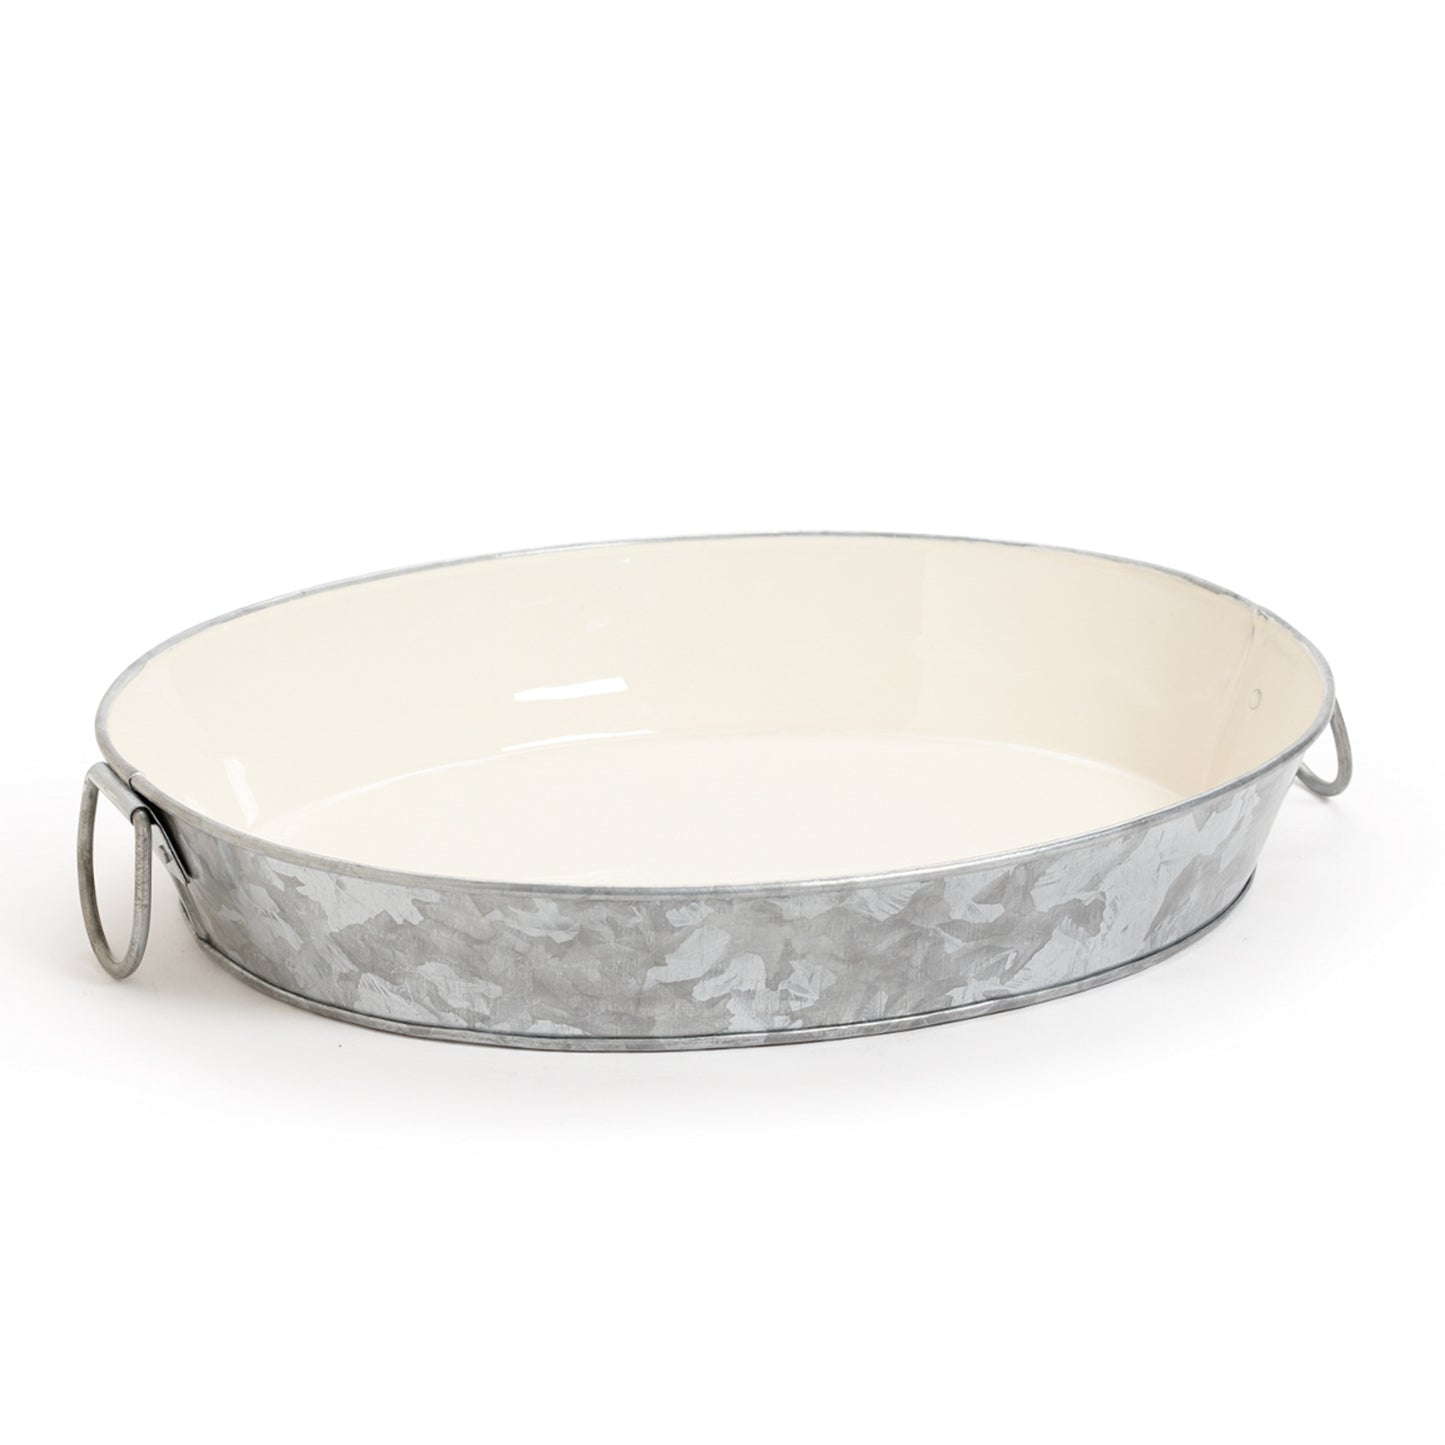 14" Dia. Round Galvanized Tray with Rope Handles, 4.2" deep